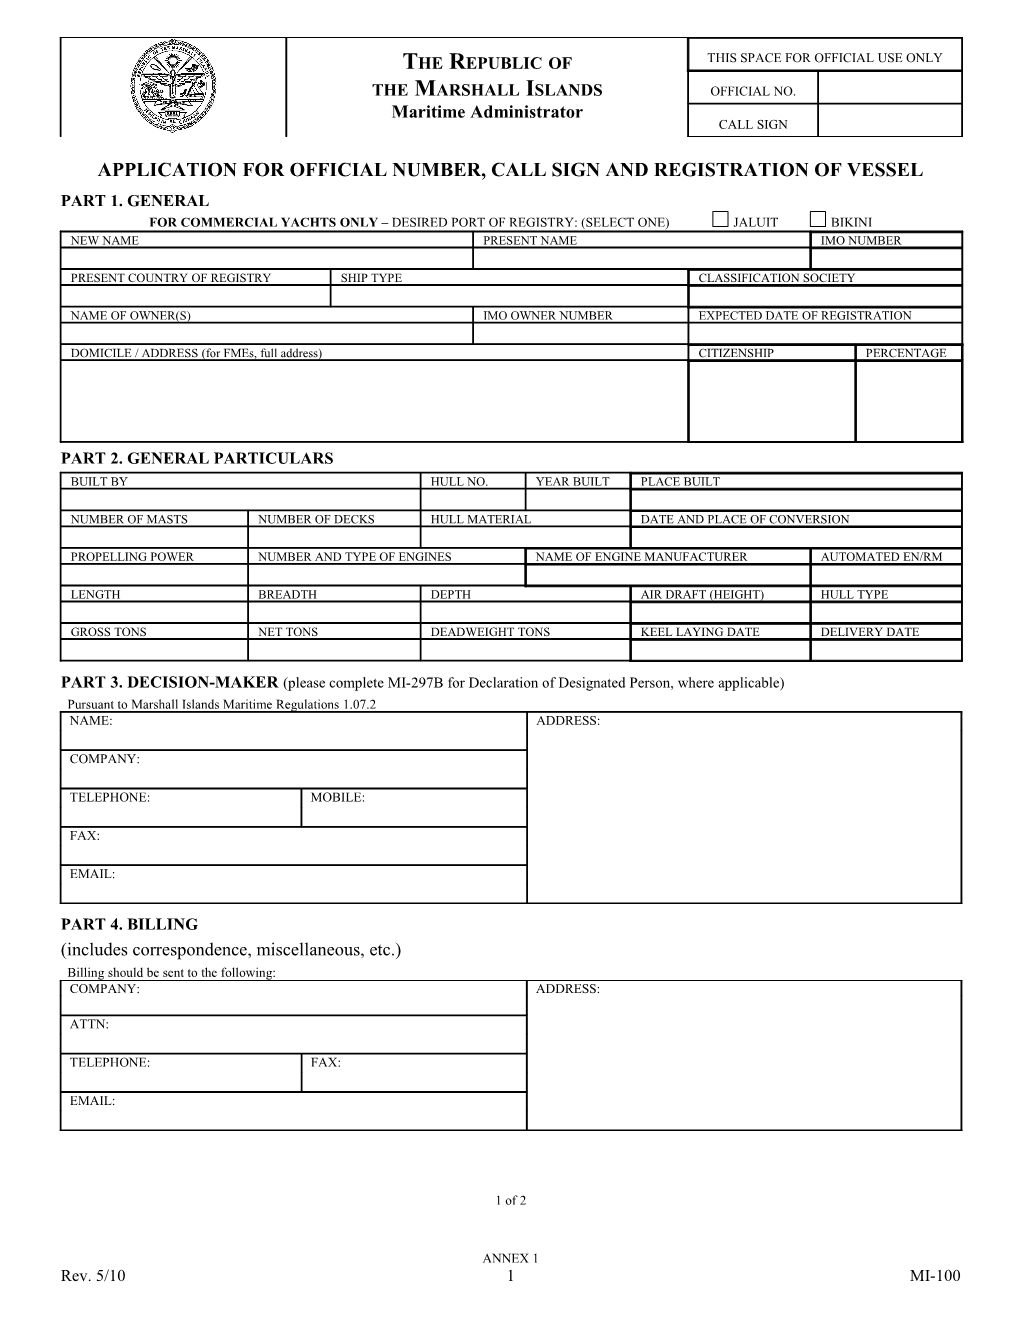 Application for Official Number, Call Sign and Registration of Vessel